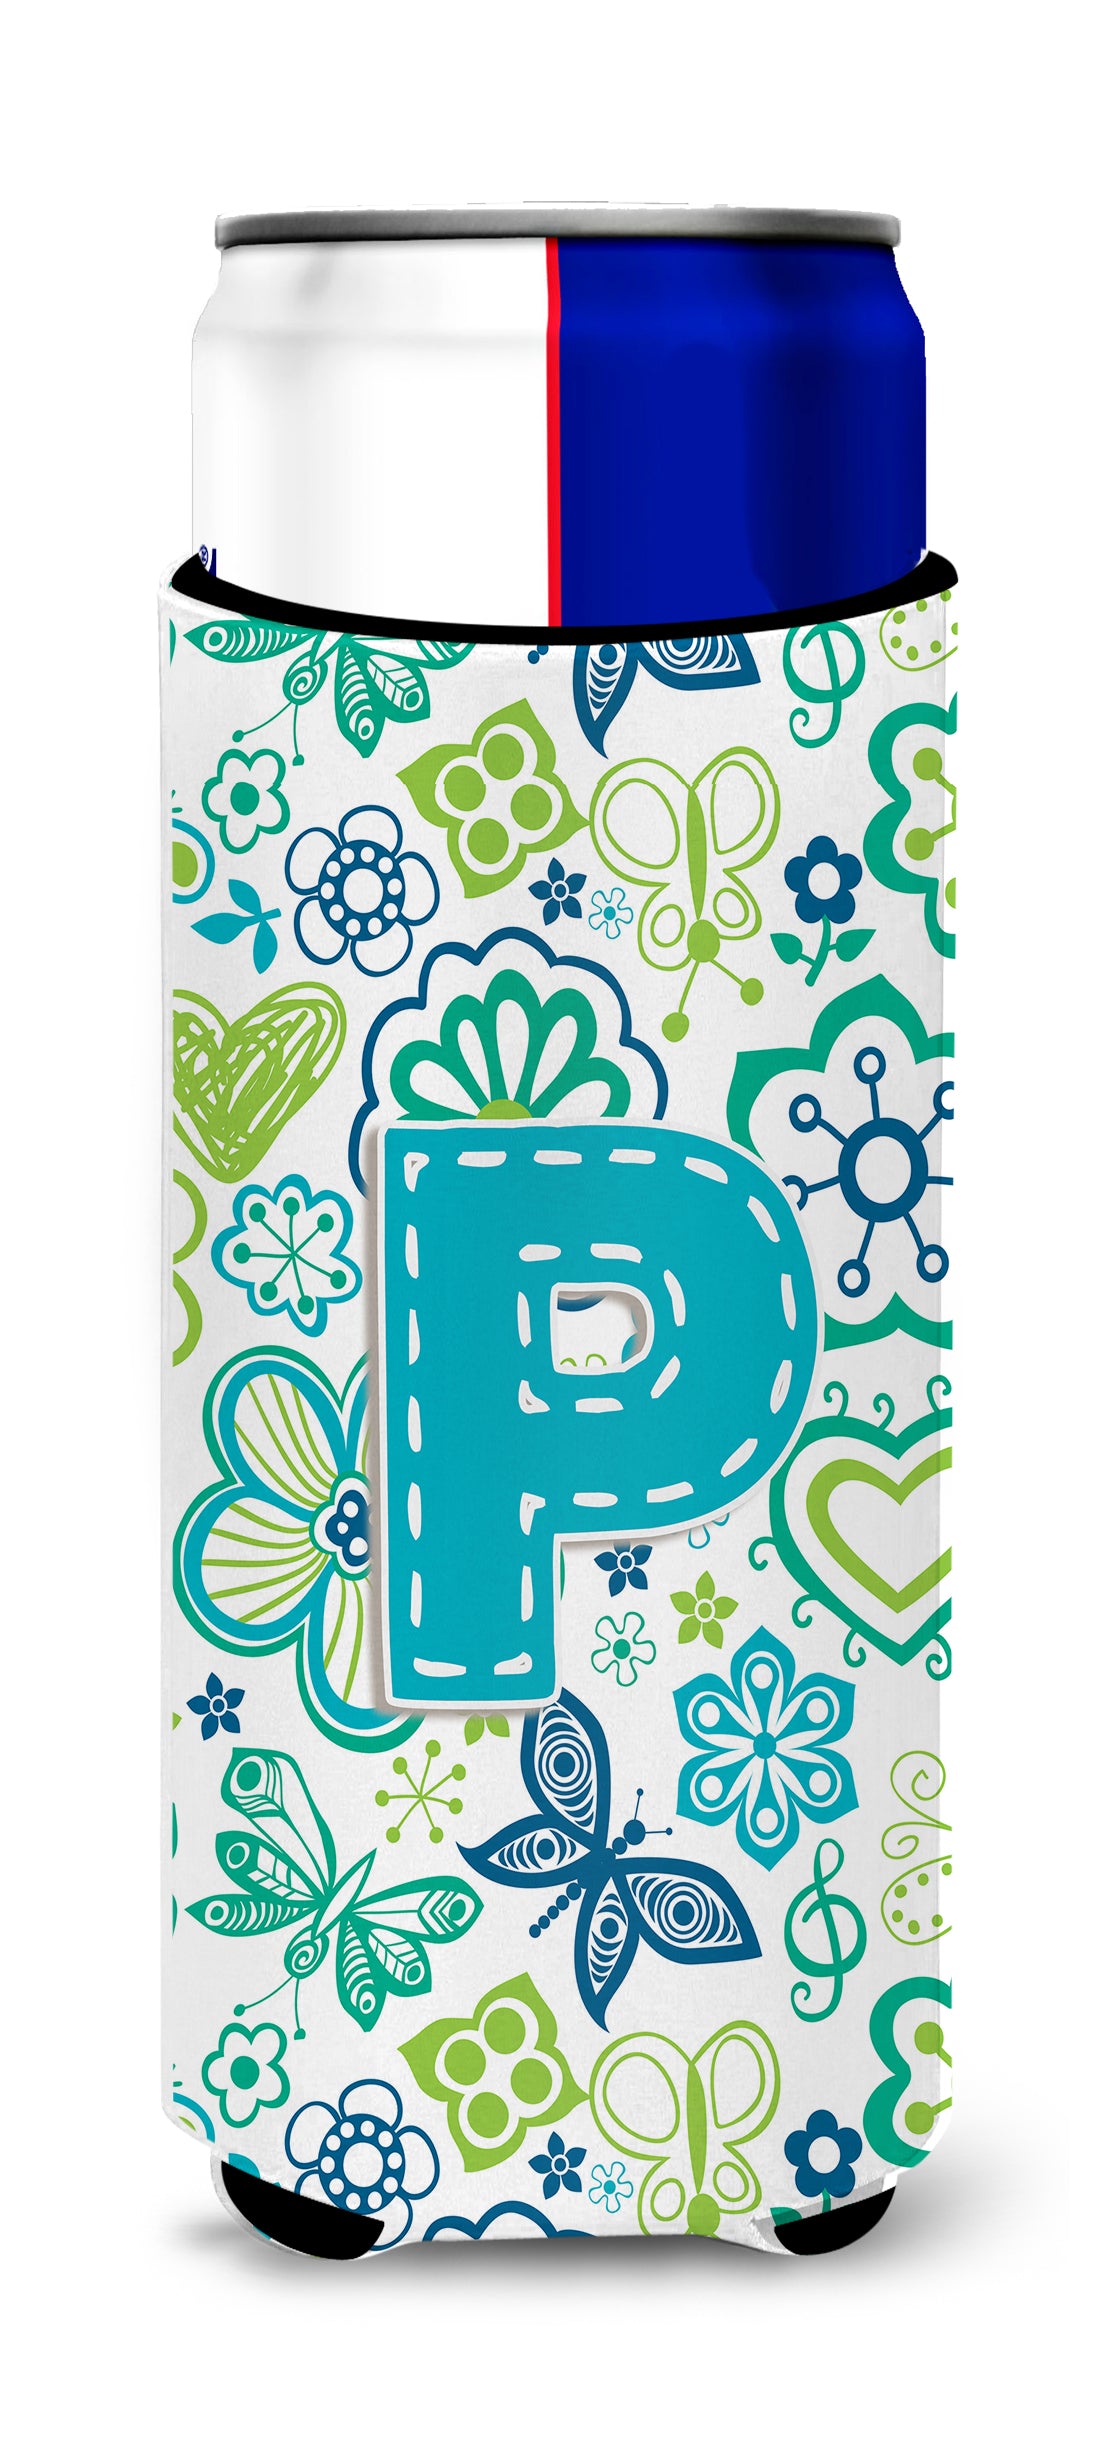 Letter P Flowers and Butterflies Teal Blue Ultra Beverage Insulators for slim cans CJ2006-PMUK.